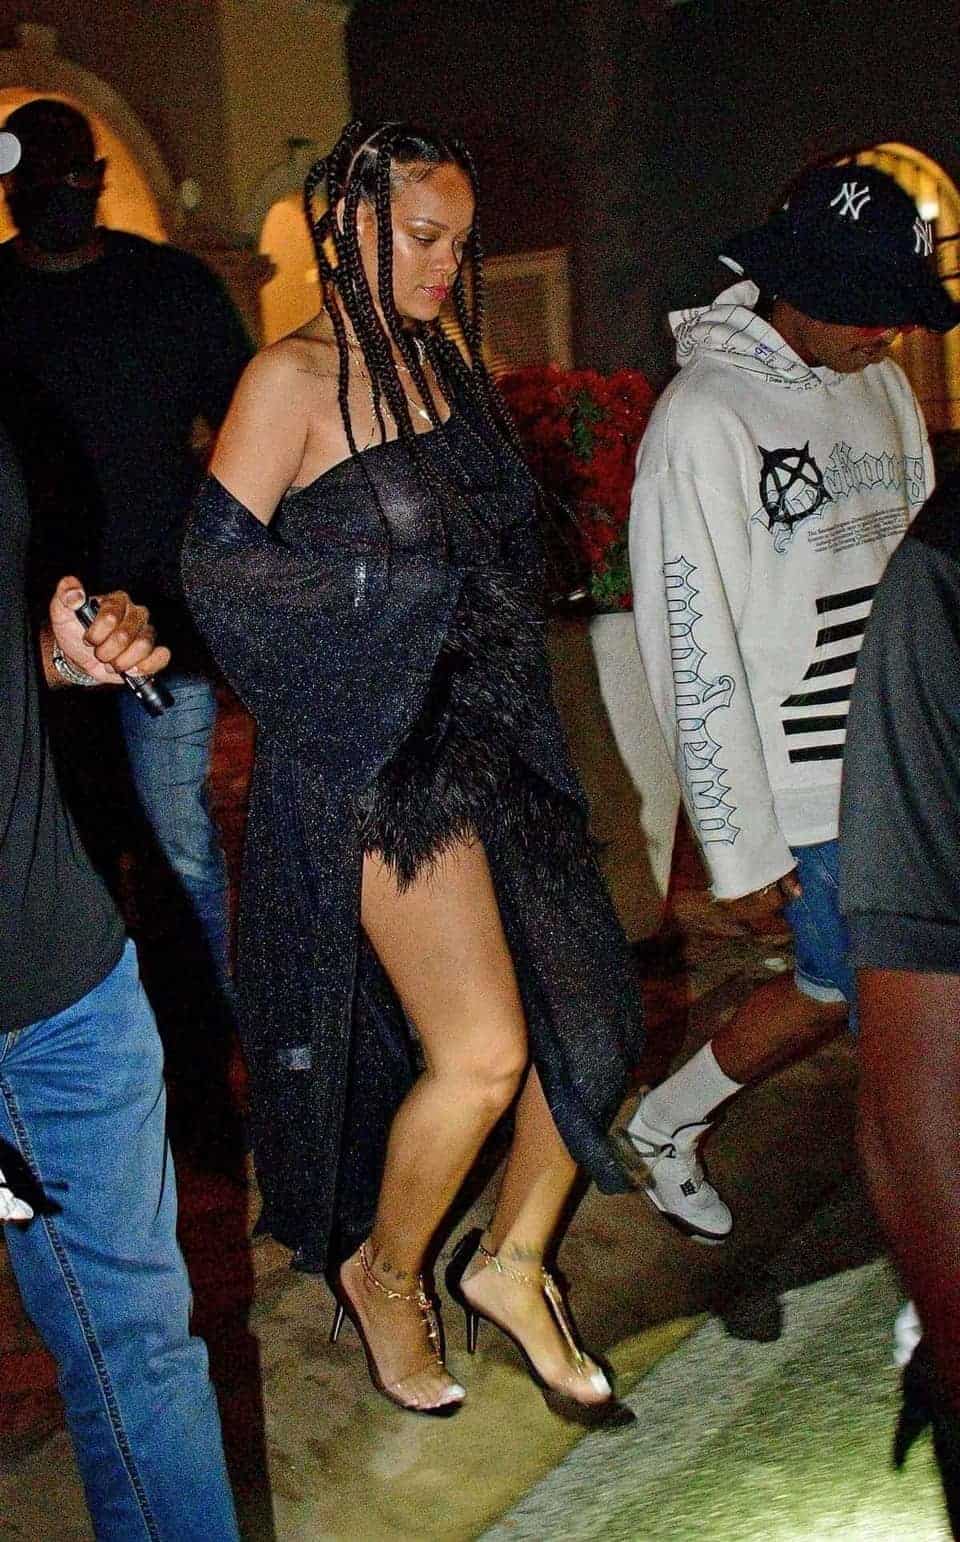 Rihanna Shines in a Black Gown Alongside ASAP Rocky at New Year’s Eve Party